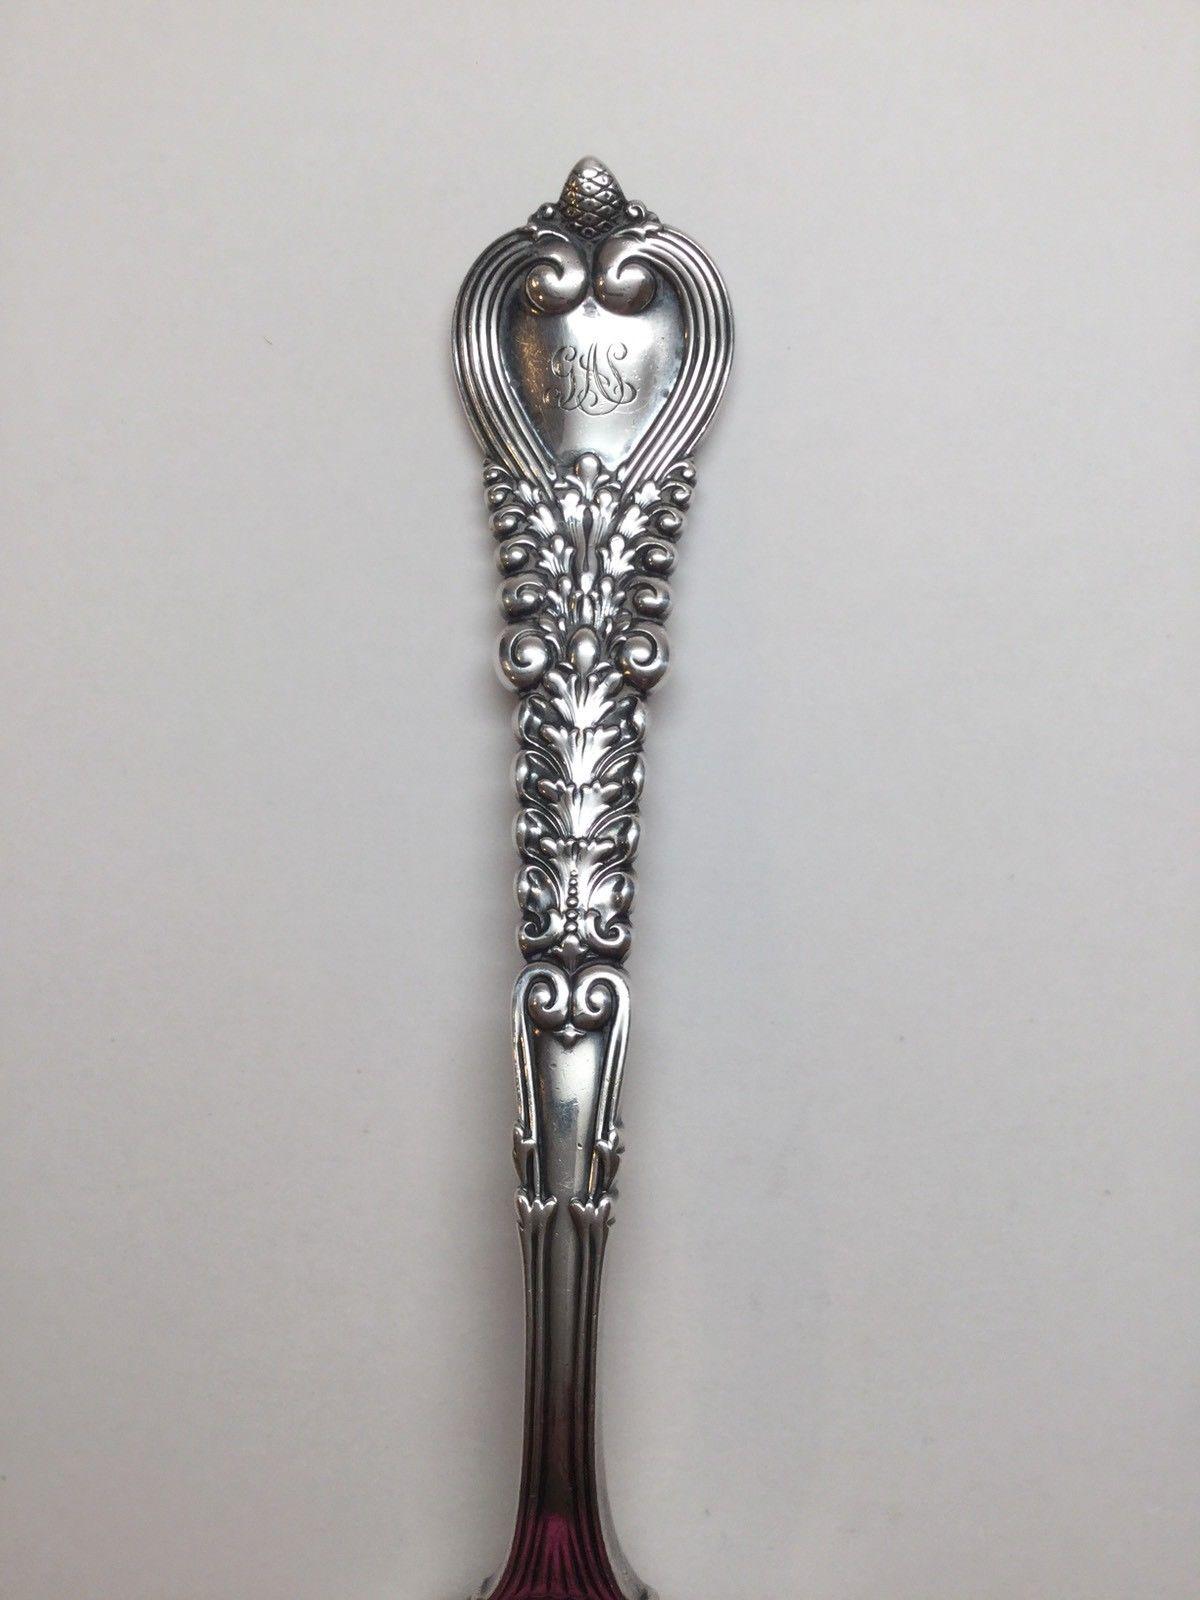 Tiffany & Co. sterling silver crumber in the 1900 Florentine pattern. 
No monogram. 
Marked: TIFFANY & CO. STERLING PAT 1900. 
Measures: 12 7/8